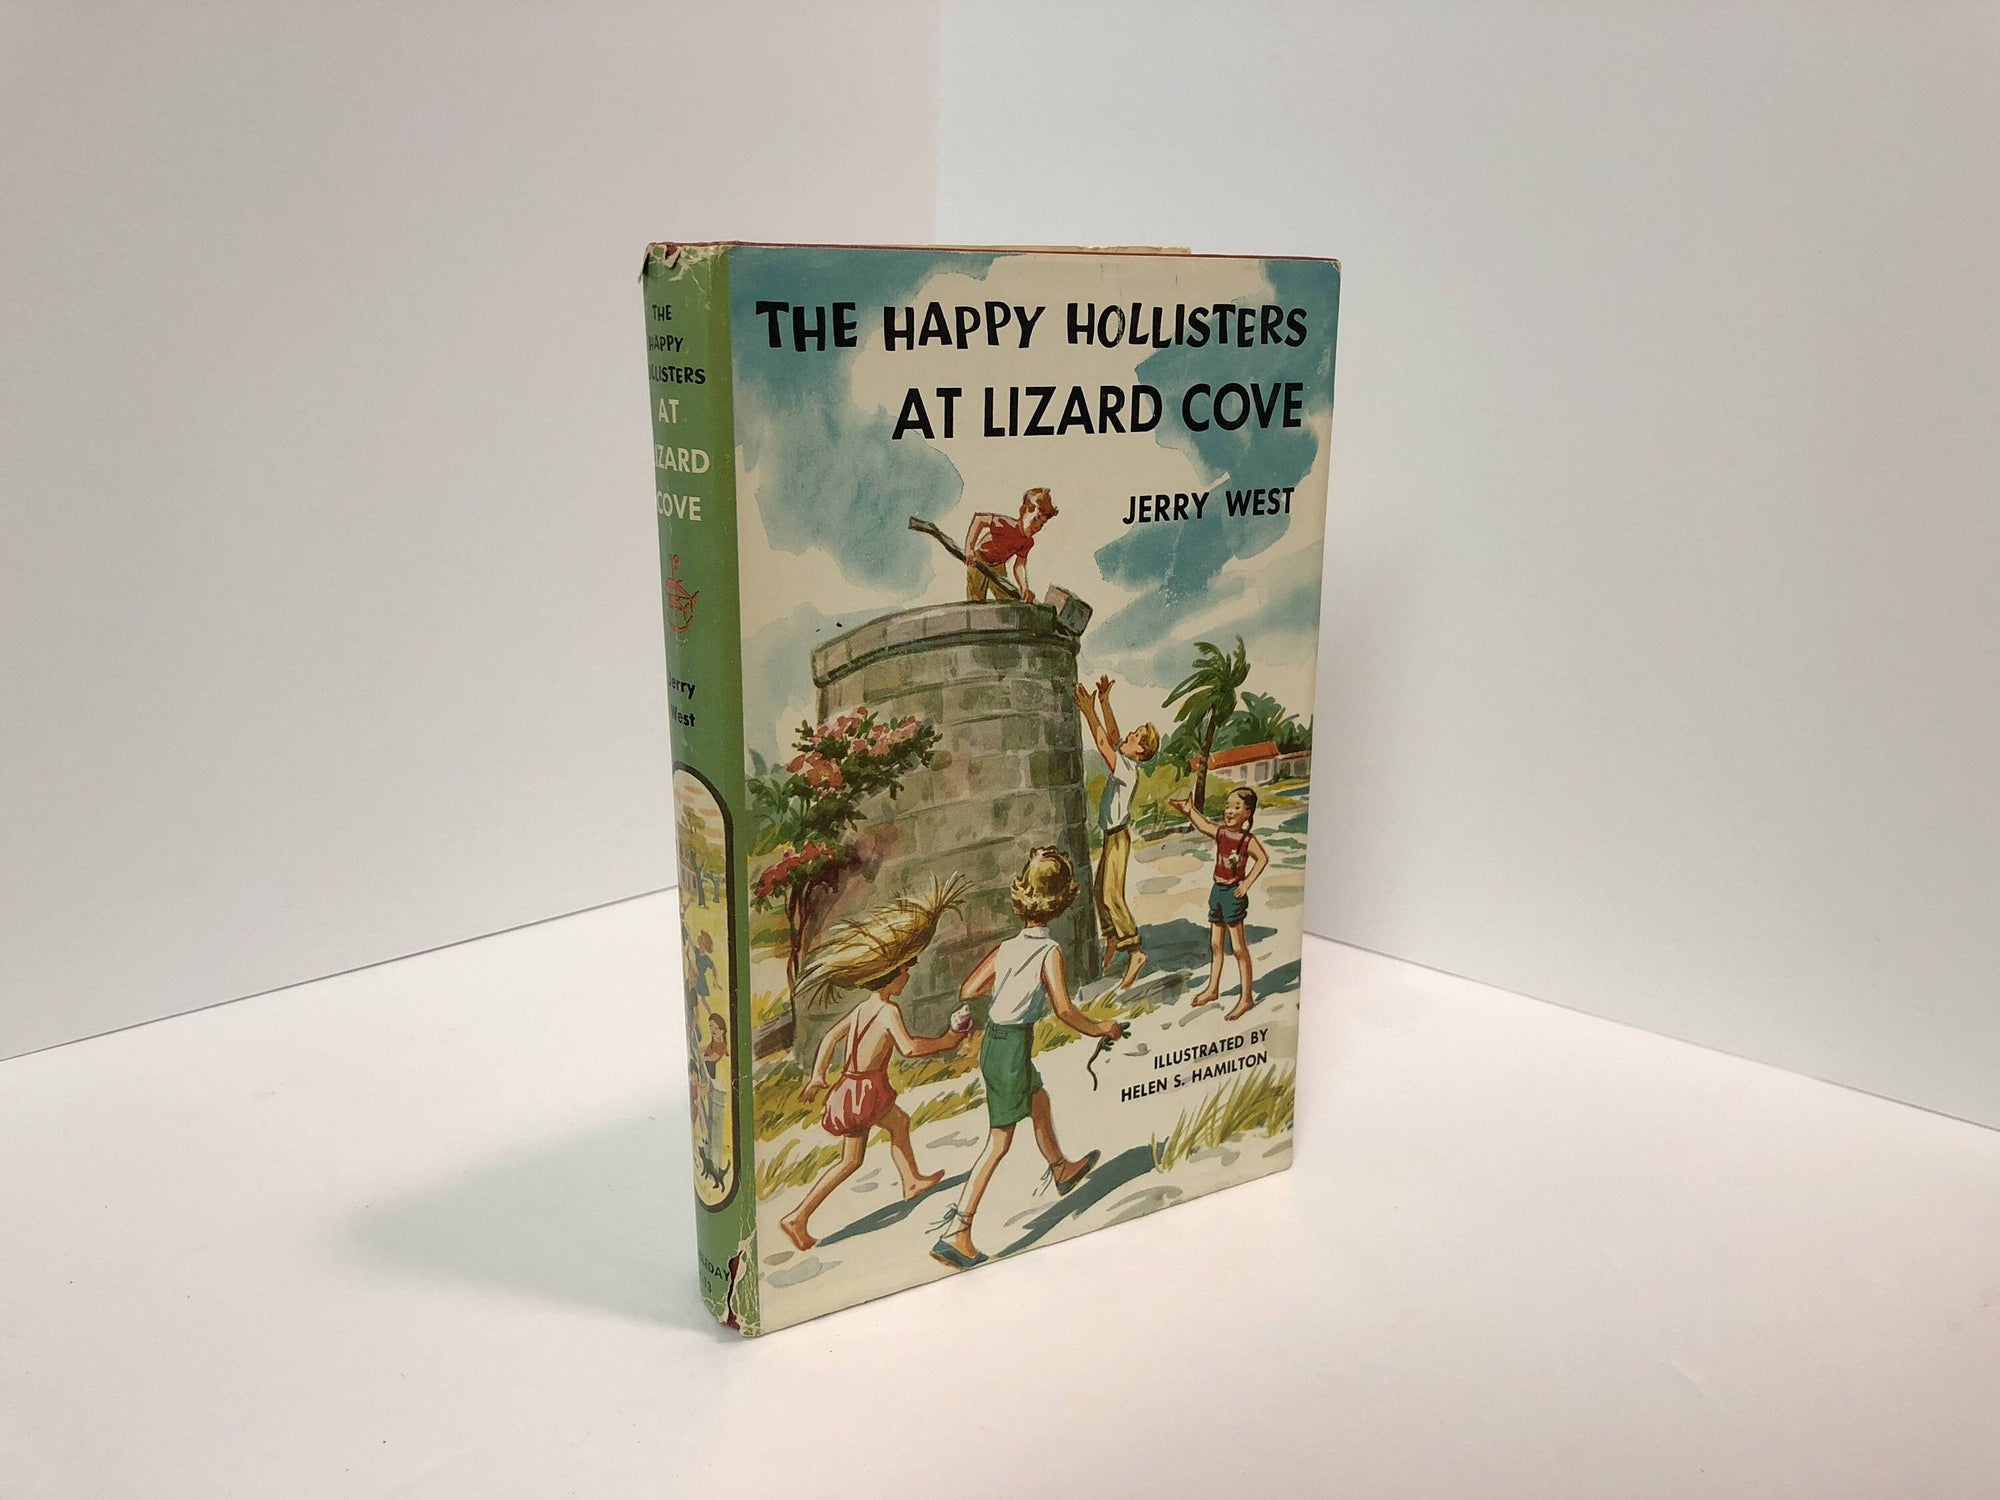 The Happy Holllisters at Lizard Cove #13 by Jerry West 1957 Vintage BookVintage Book